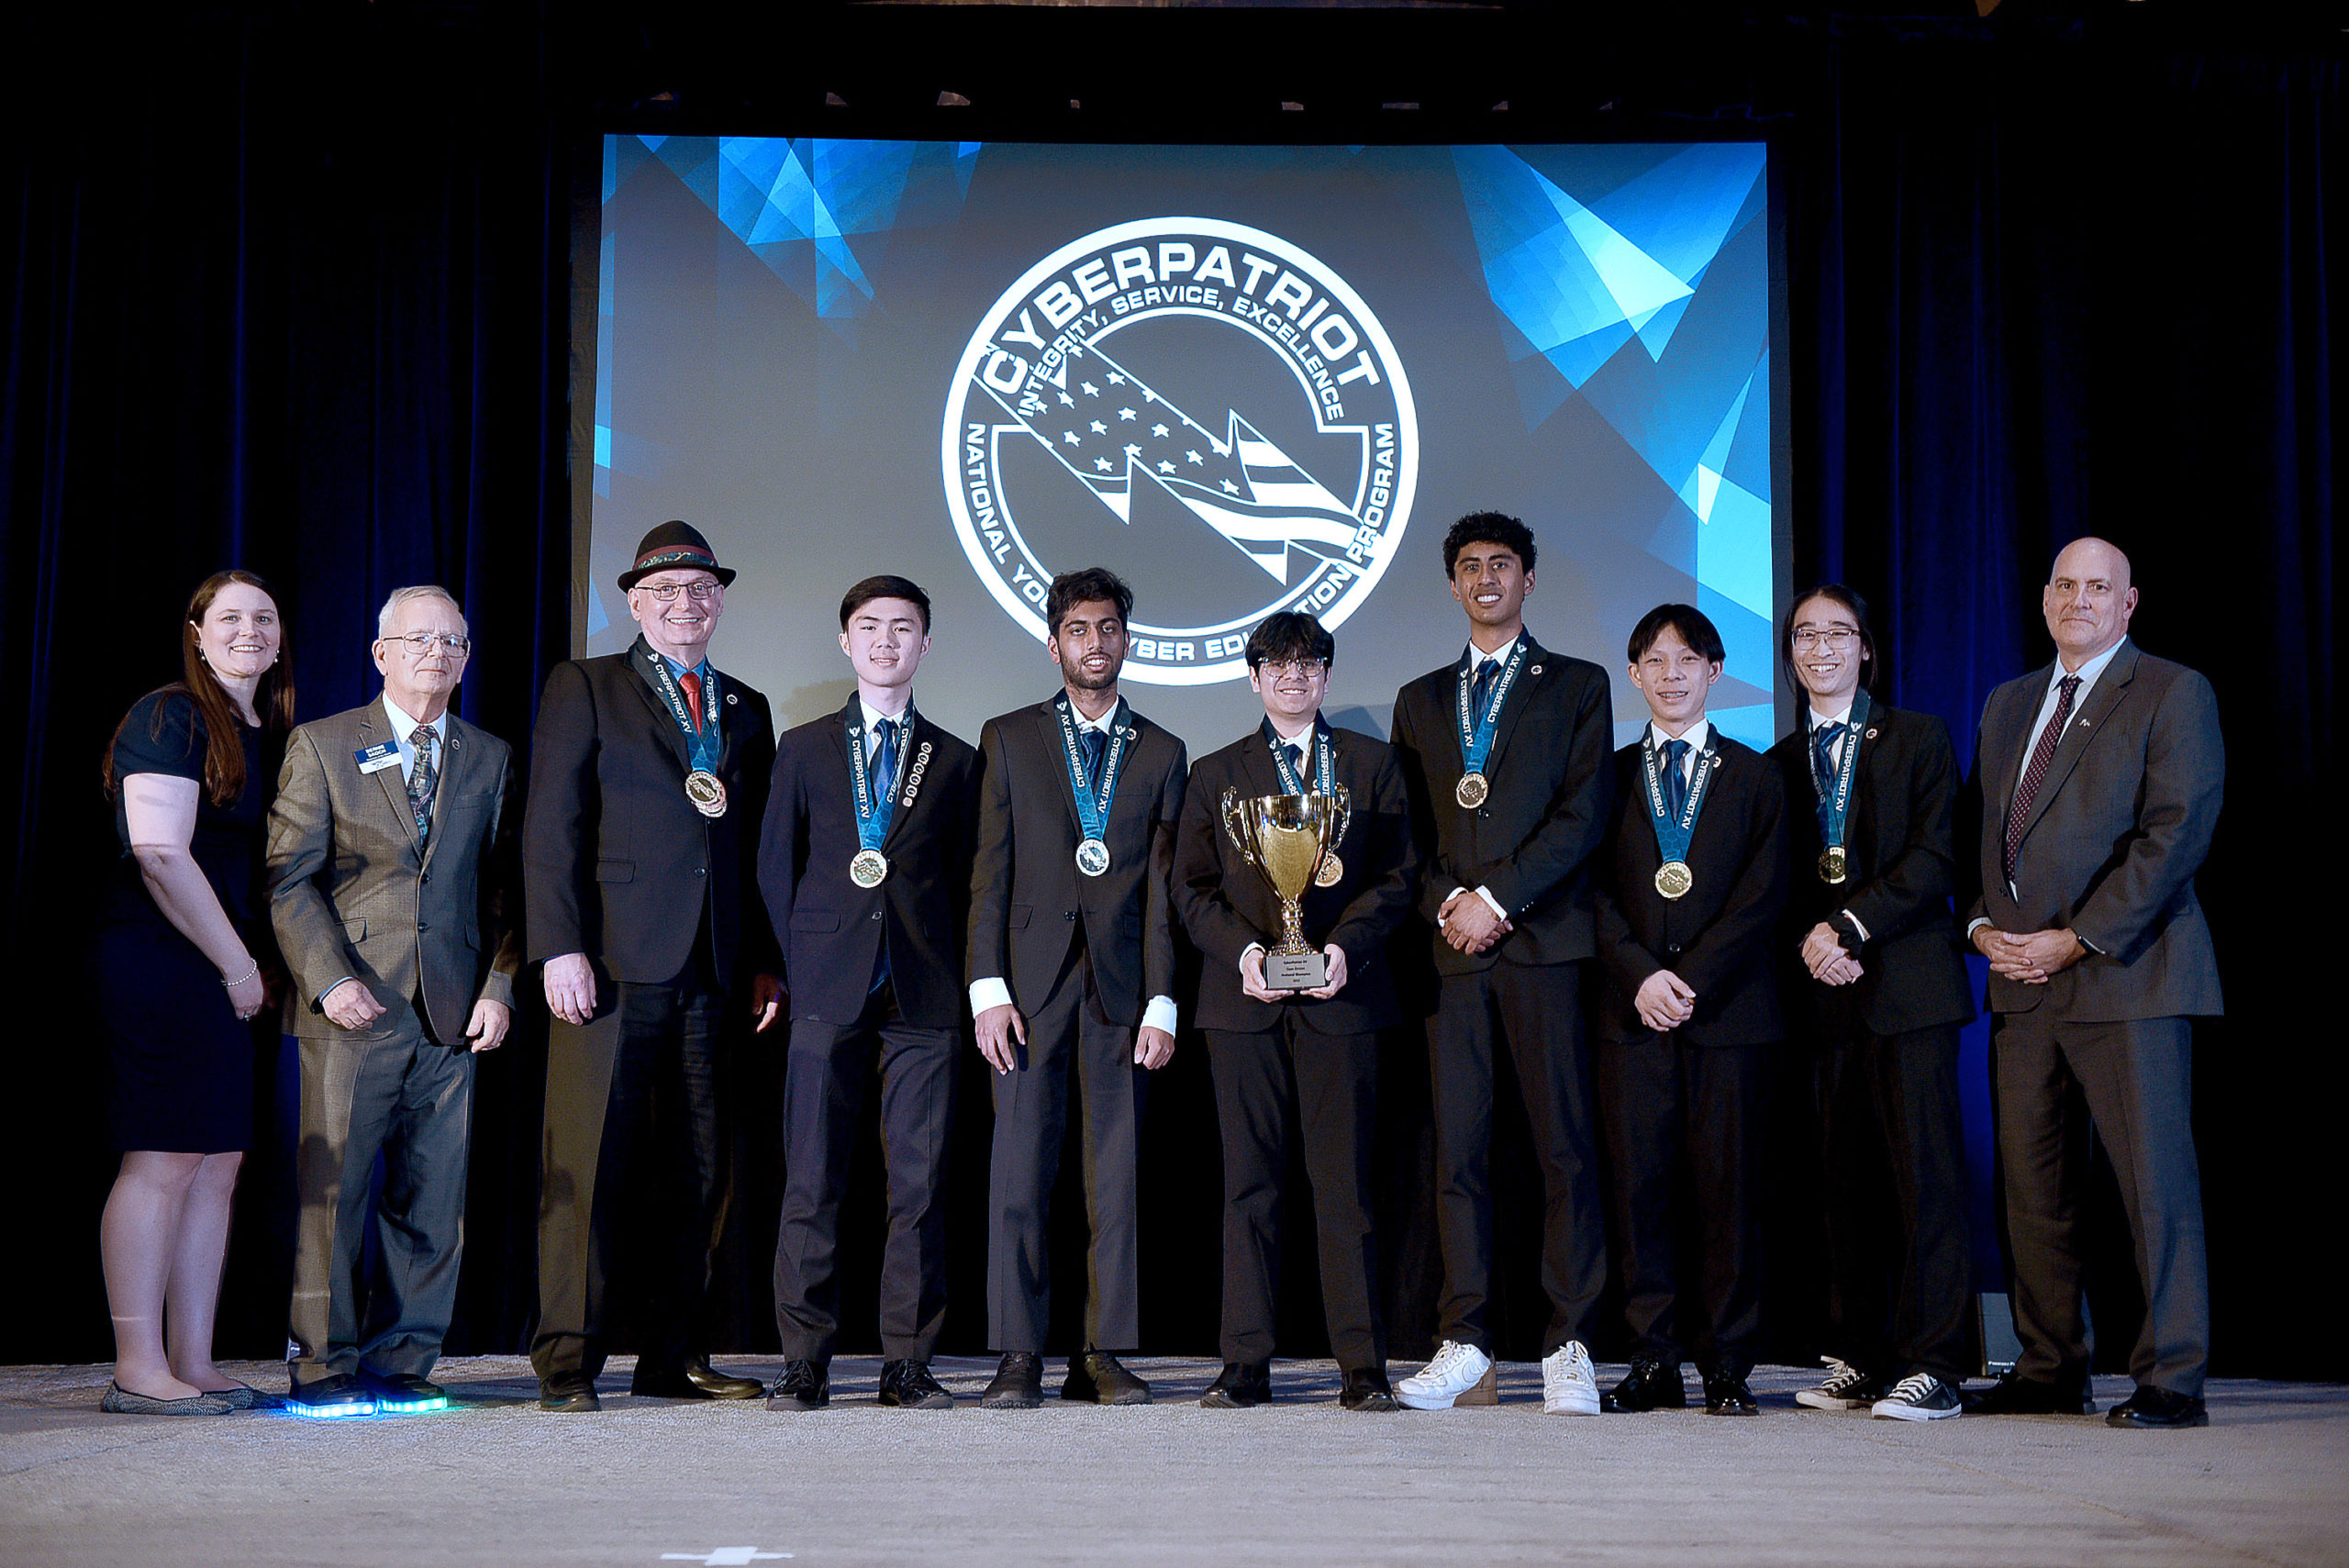 CyberPatriot XV Crowns New National Champions